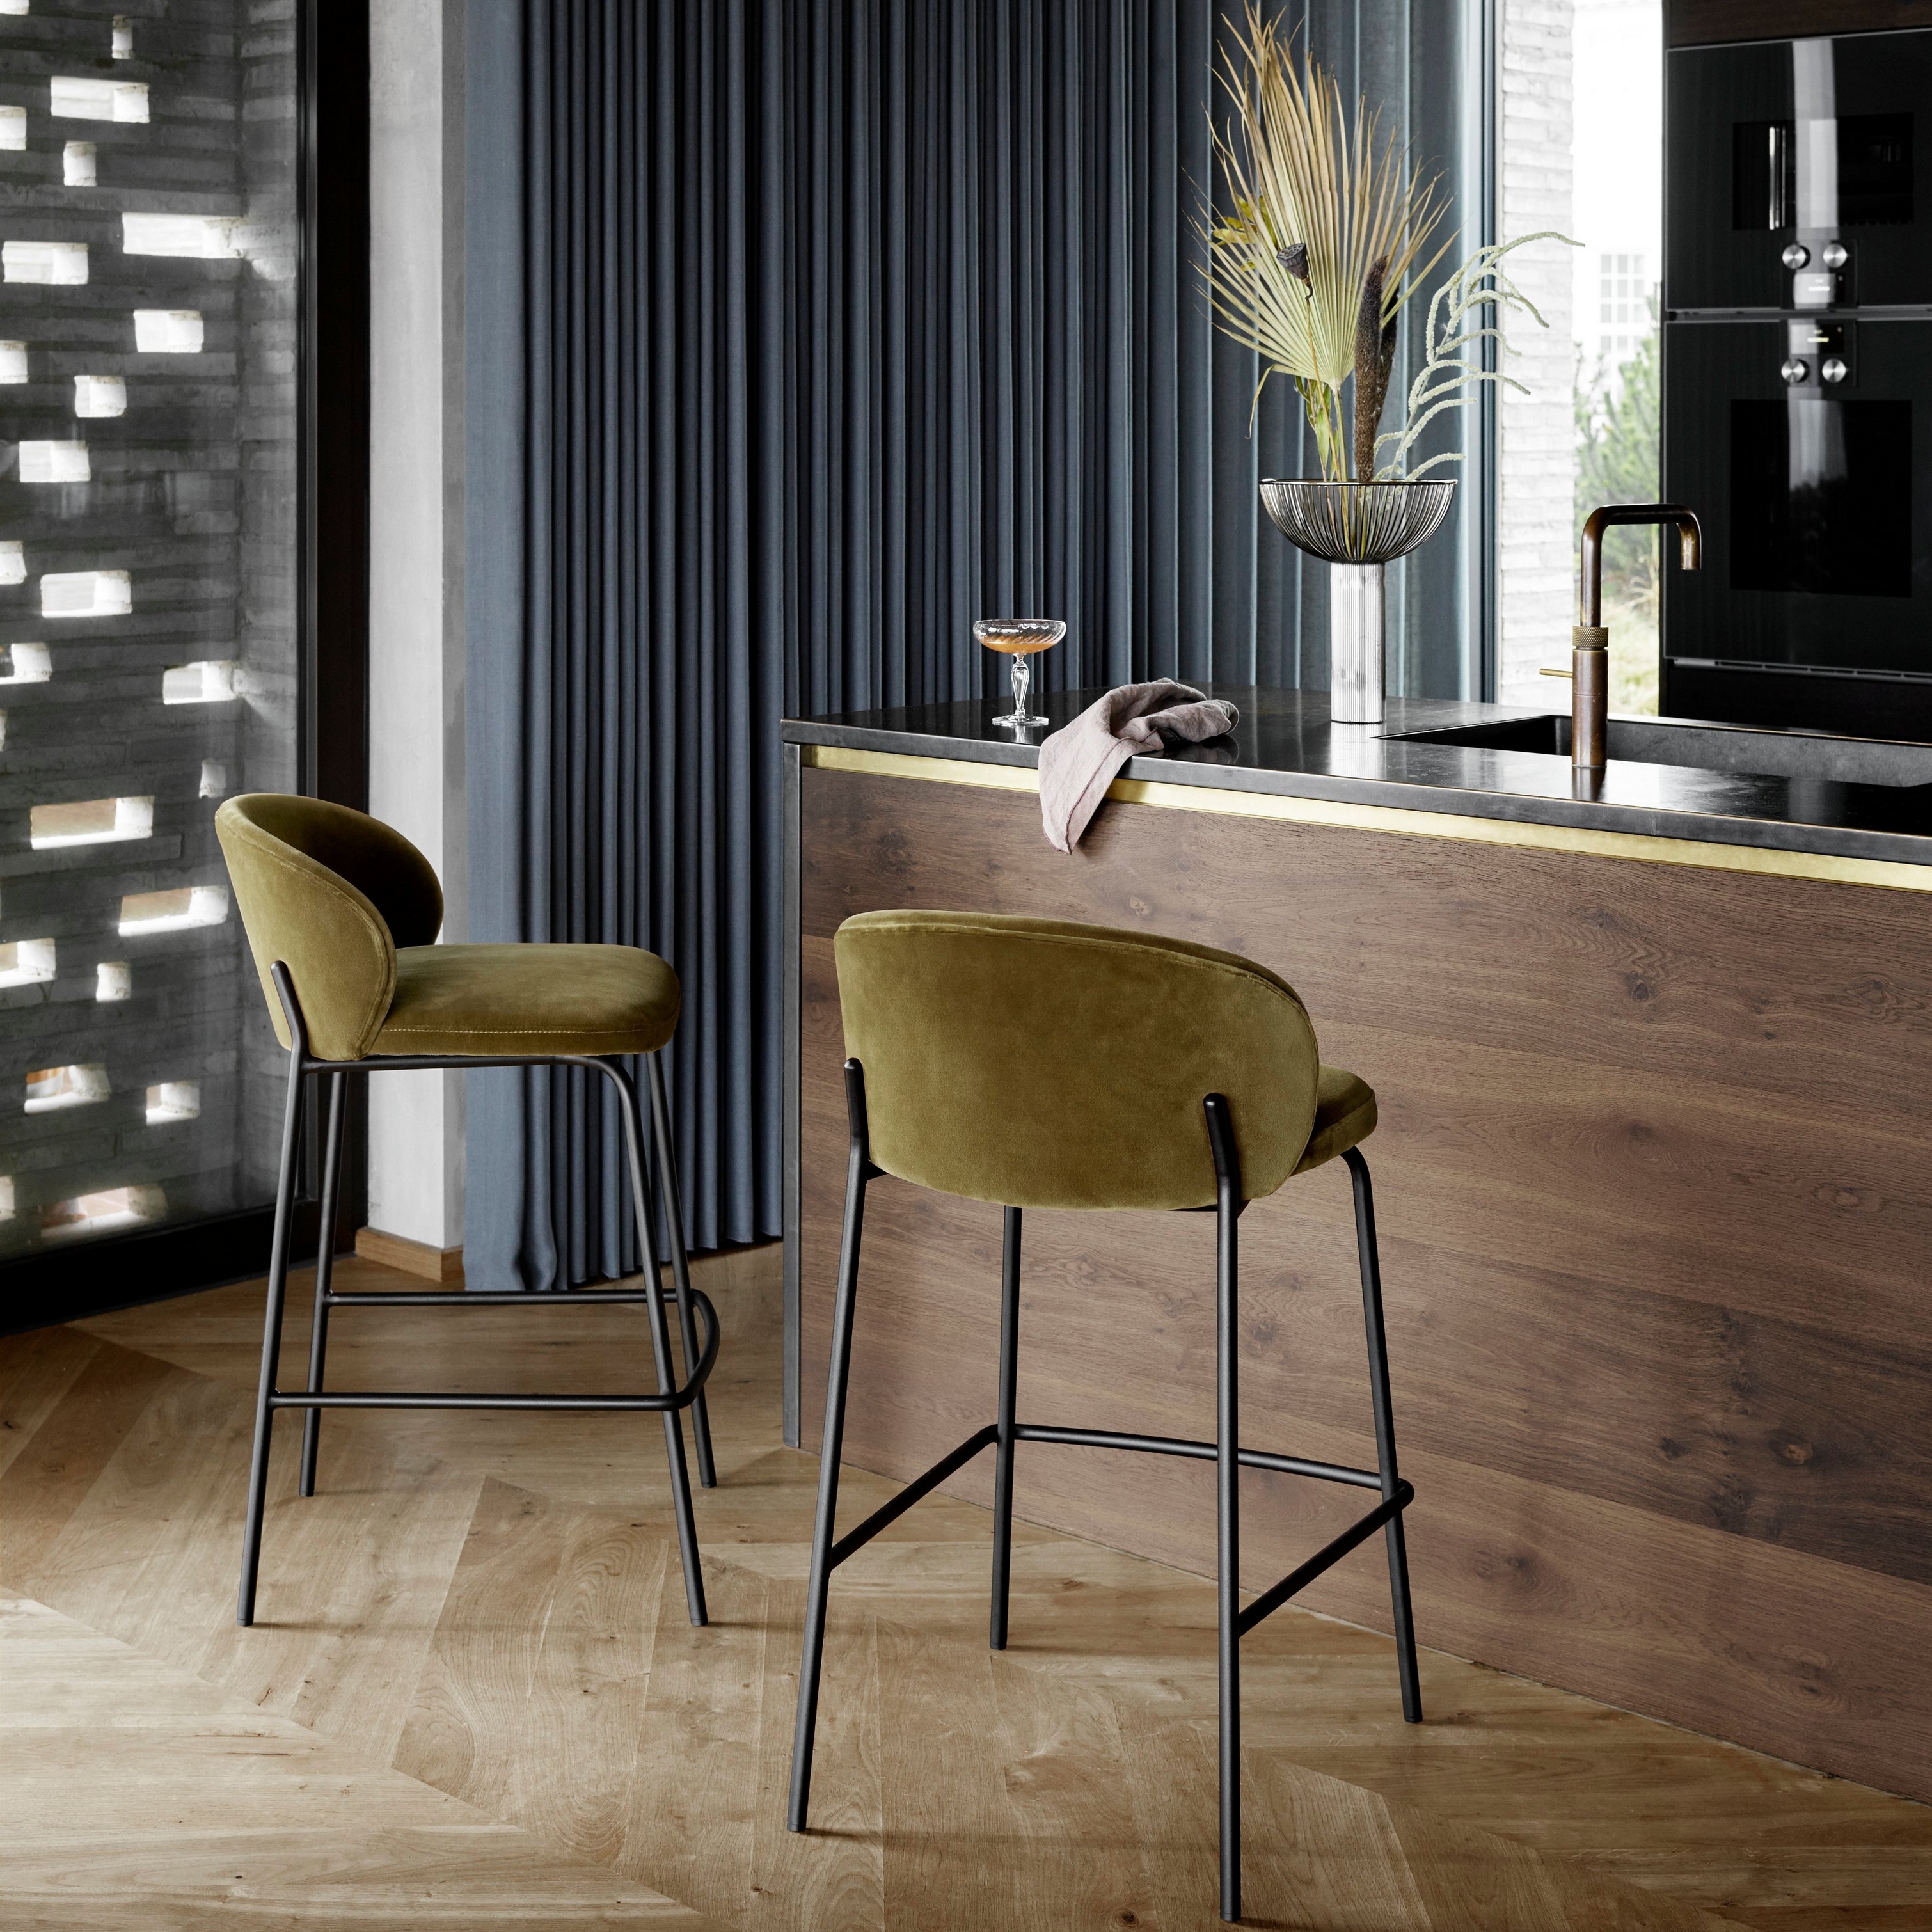 Velvet bar stools at a wooden kitchen counter with black appliances and pendant light